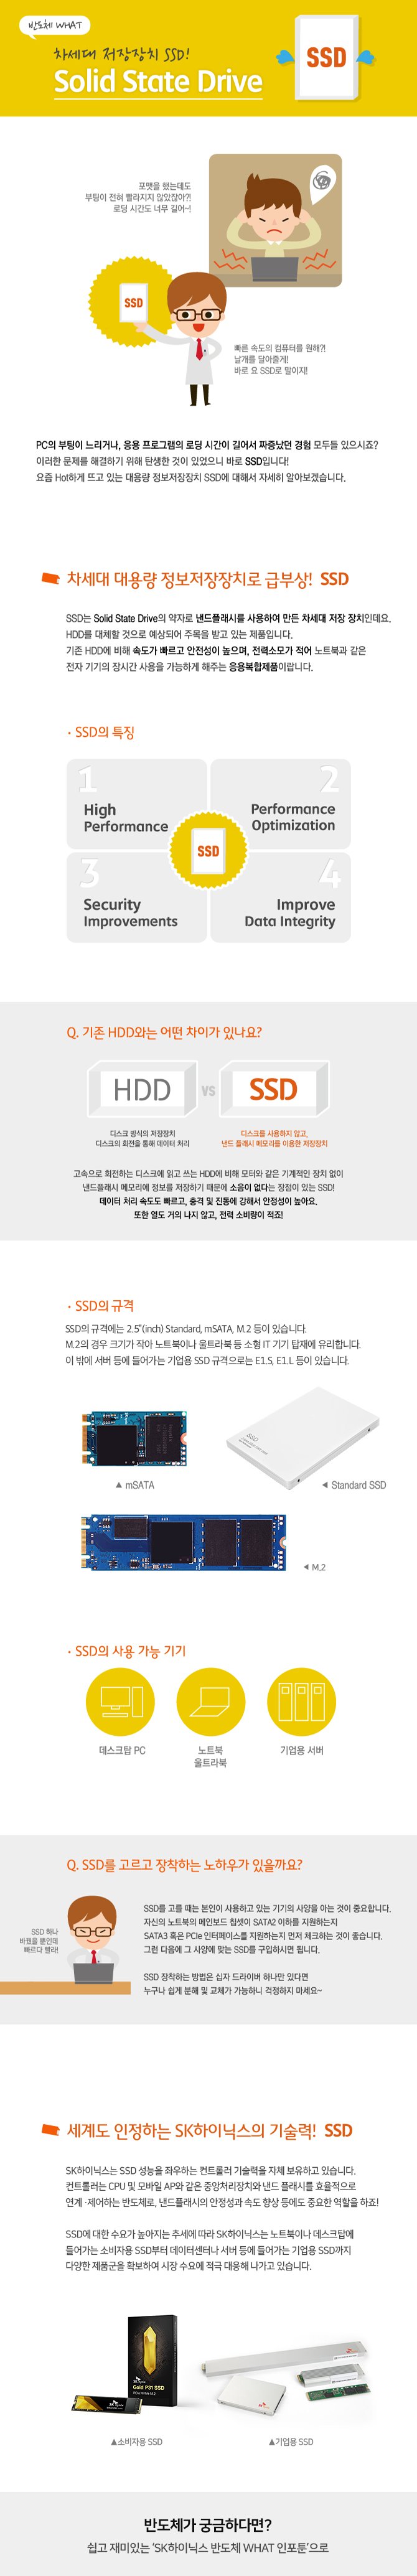 SSD(Solid State Drive)